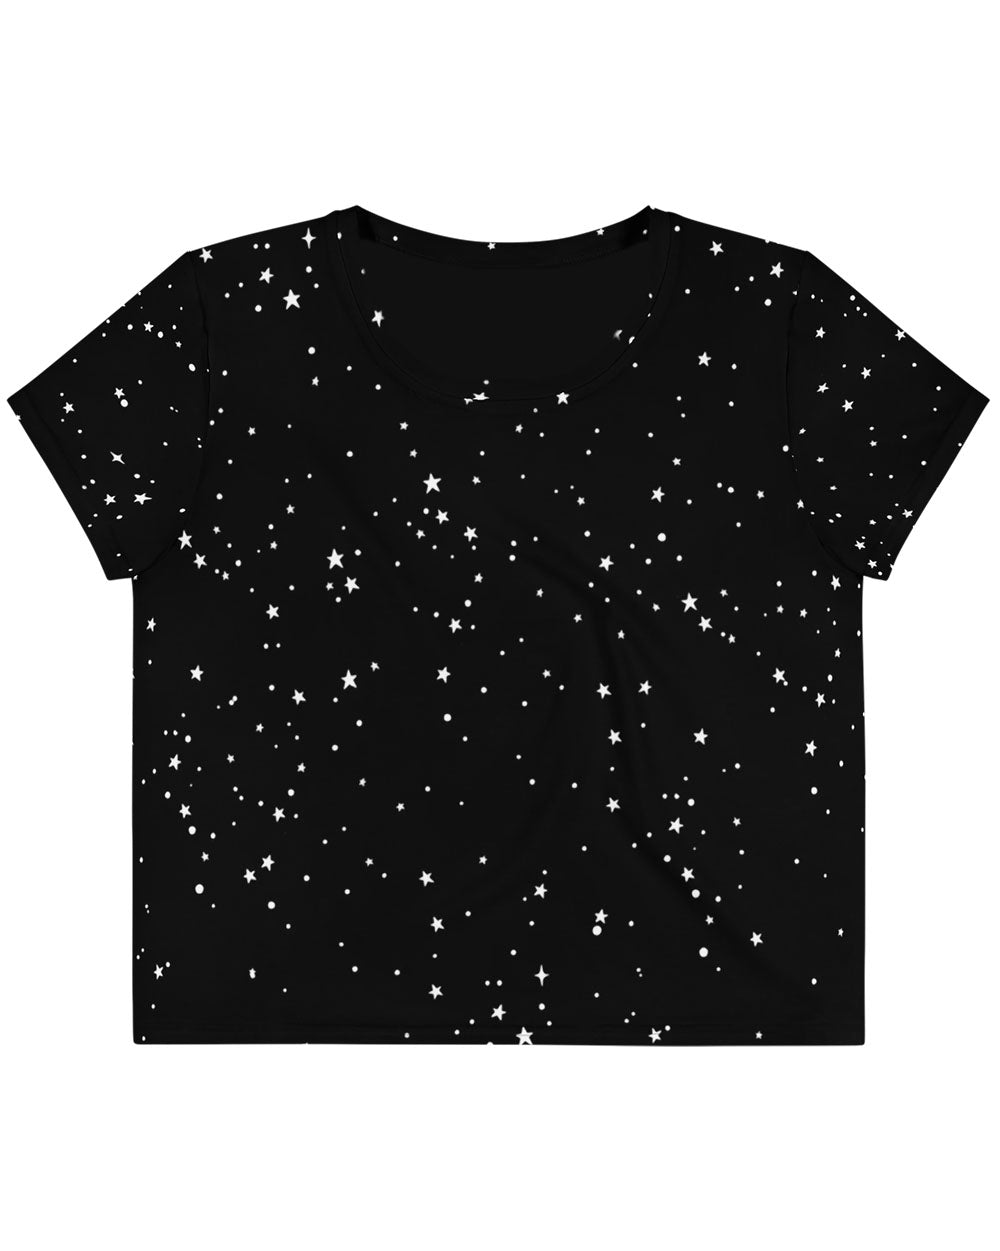 Starry Night Crop Top - Vegan Gothic Fashion - Dark Academia Alt Clothing - Alternative Occult Ethical Style - On Demand Sustainable Product